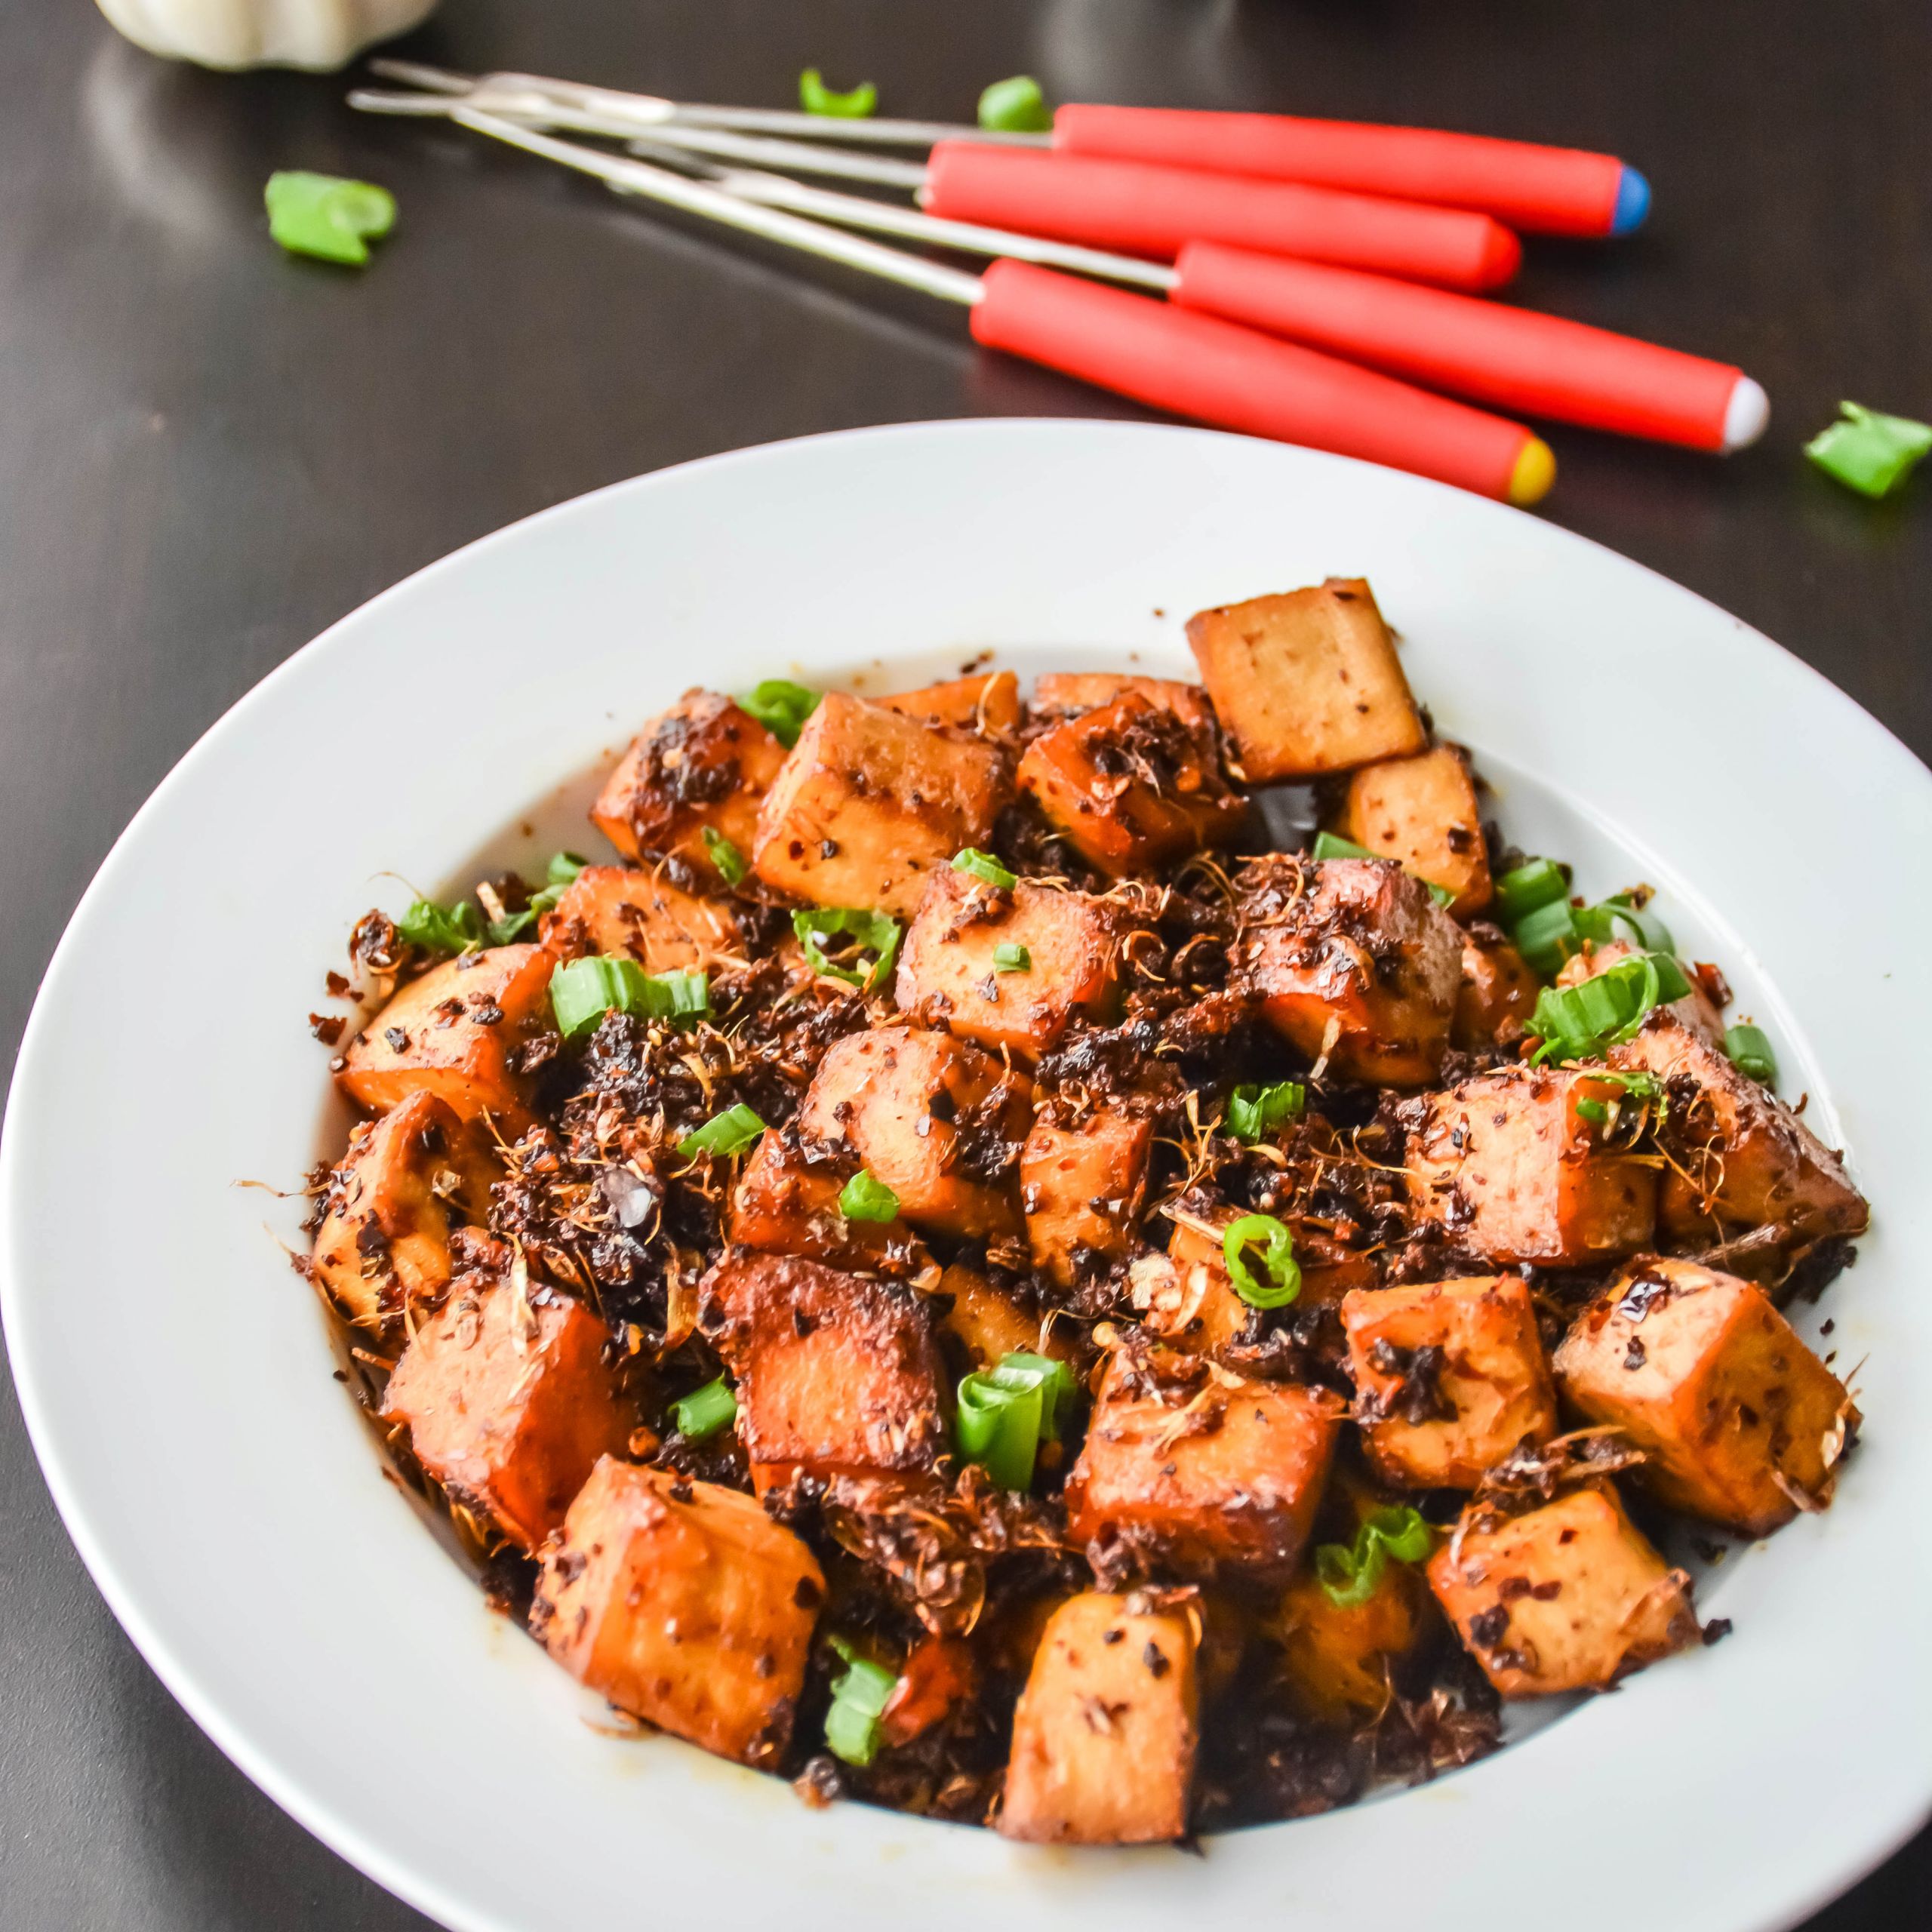 Easy Spicy Tofu Recipes
 Spicy Garlic Tofu in 10 minutes – Relish The Bite